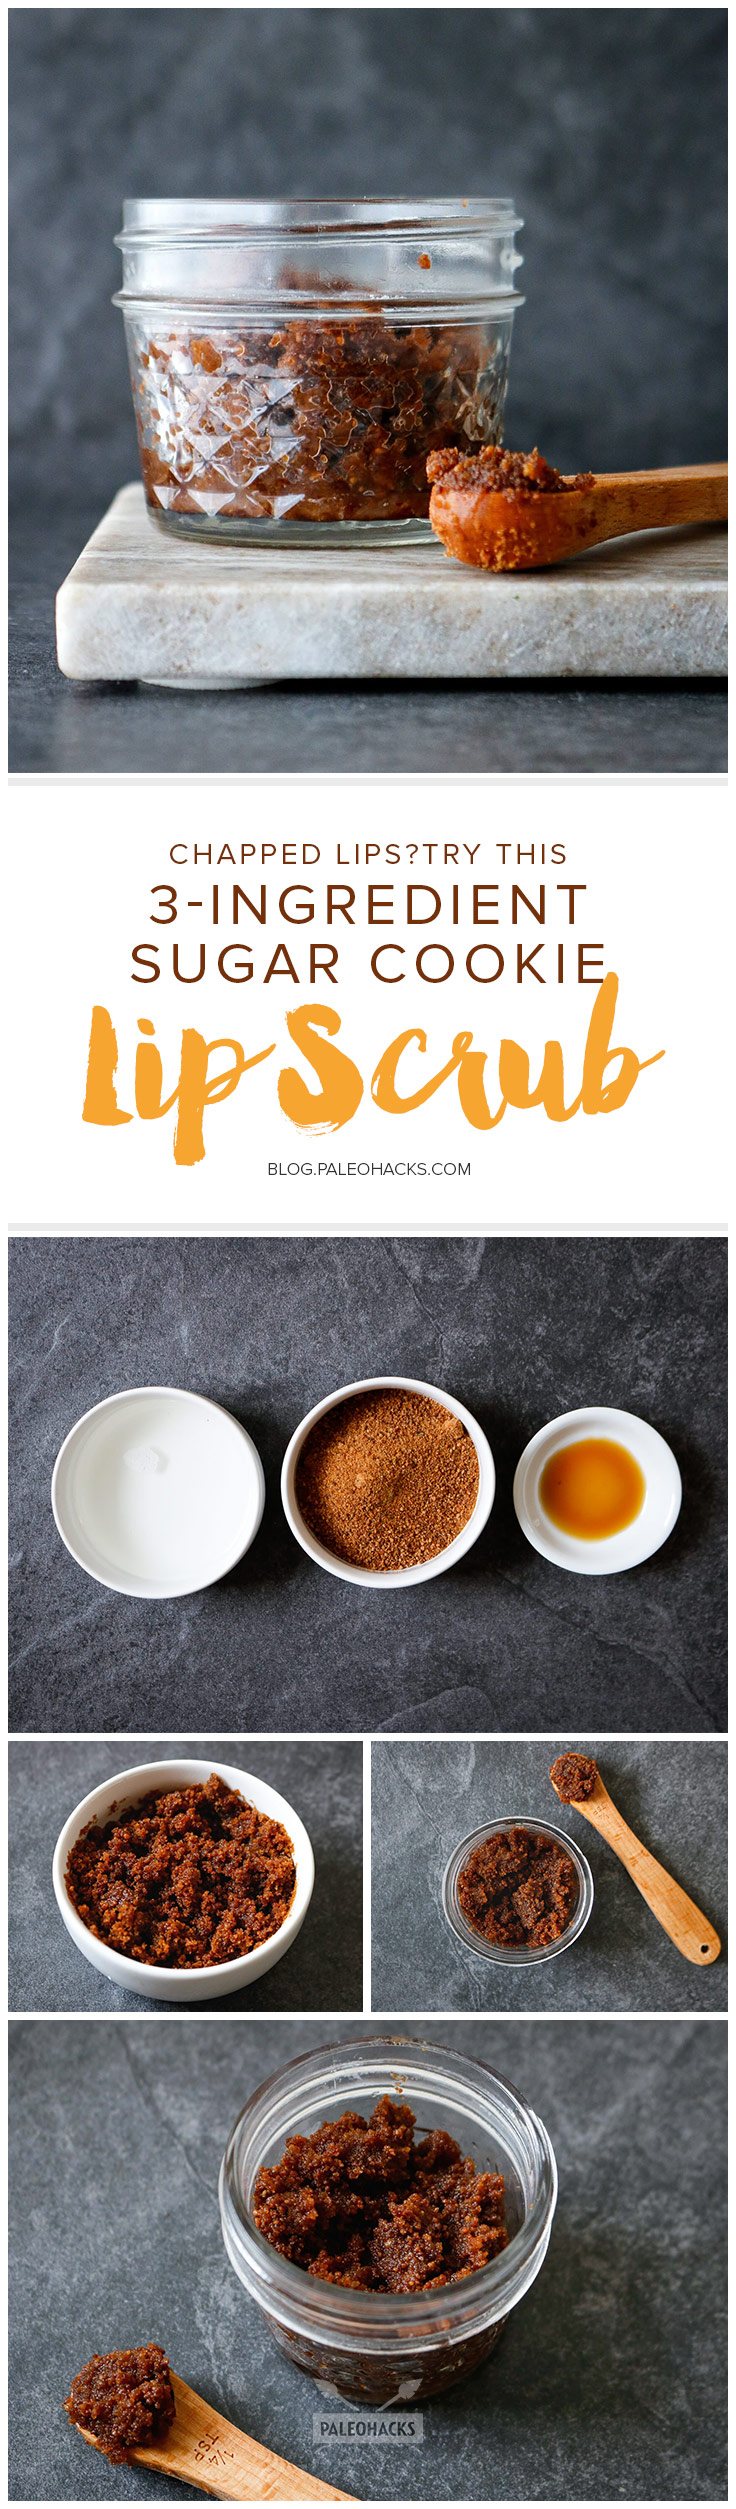 Exfoliate your lips with this hydrating Sugar Cookie Lip Scrub made with lipid-rich coconut oil.